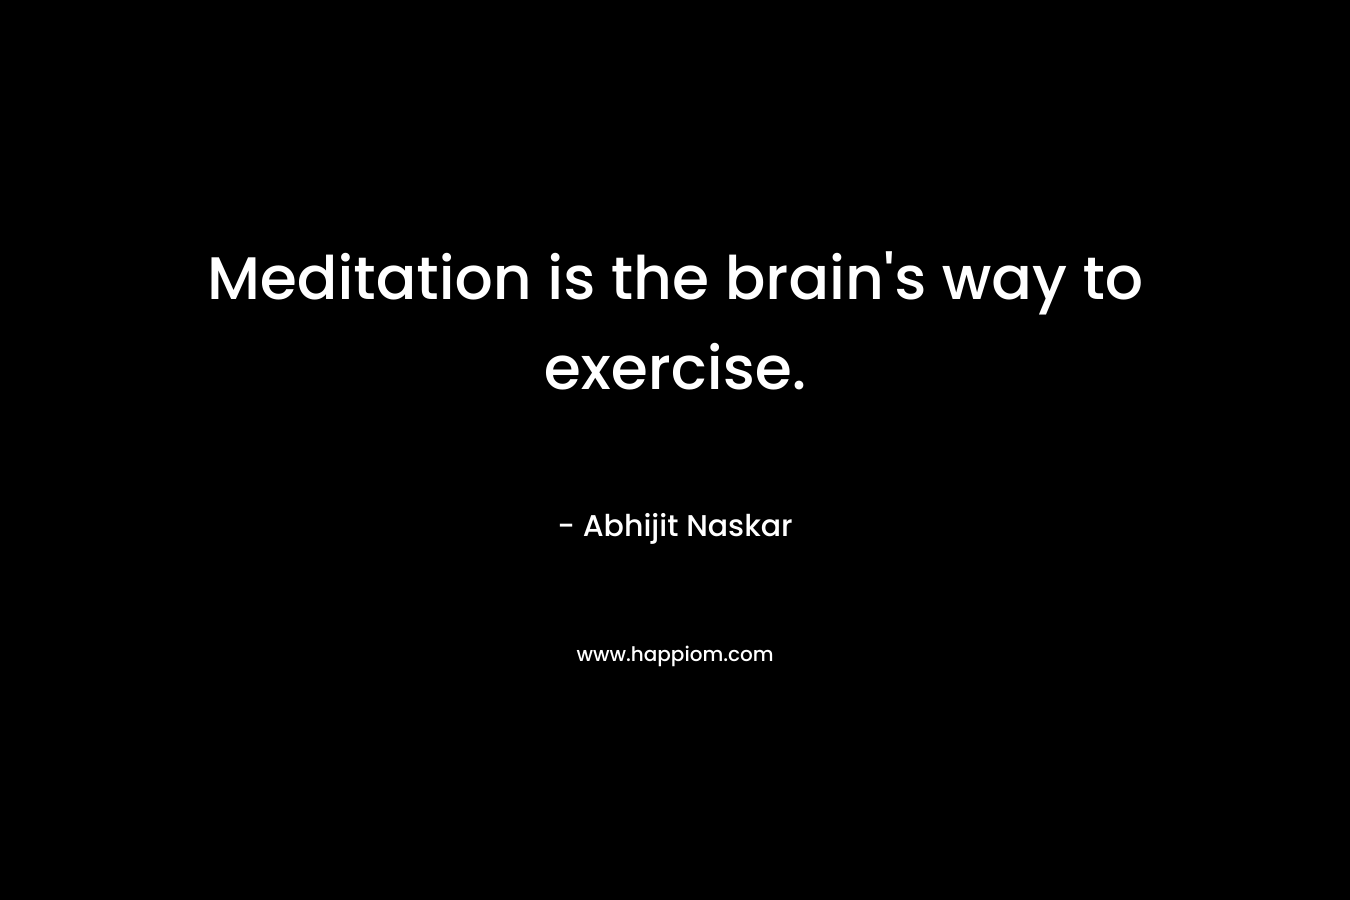 Meditation is the brain's way to exercise.